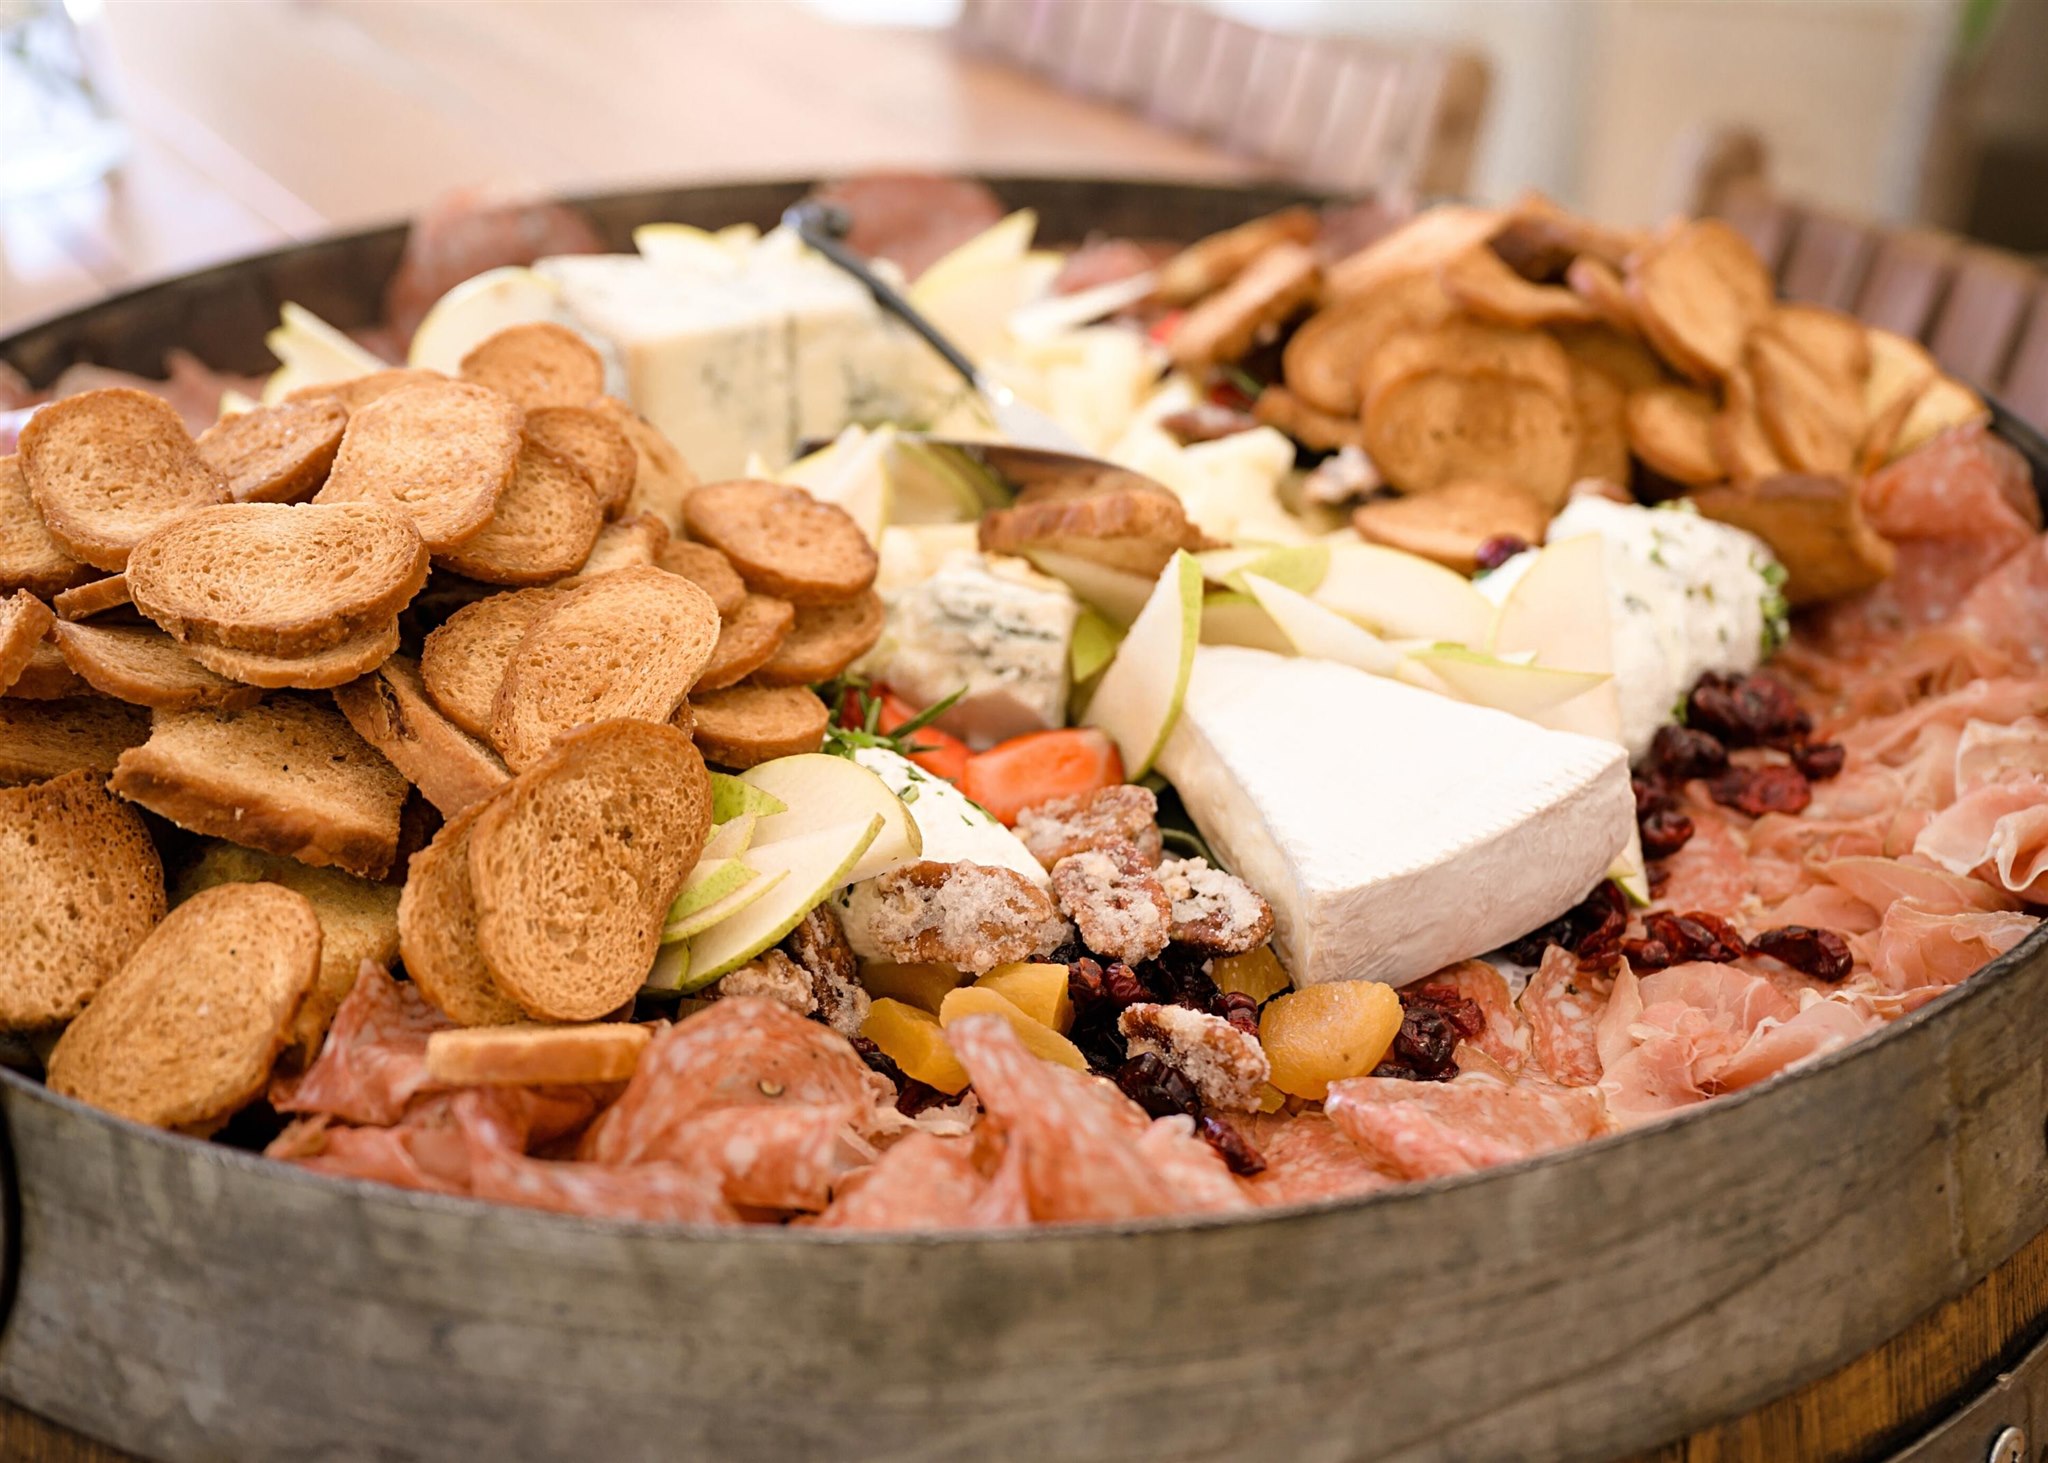 Did someone say charcuterie platter?